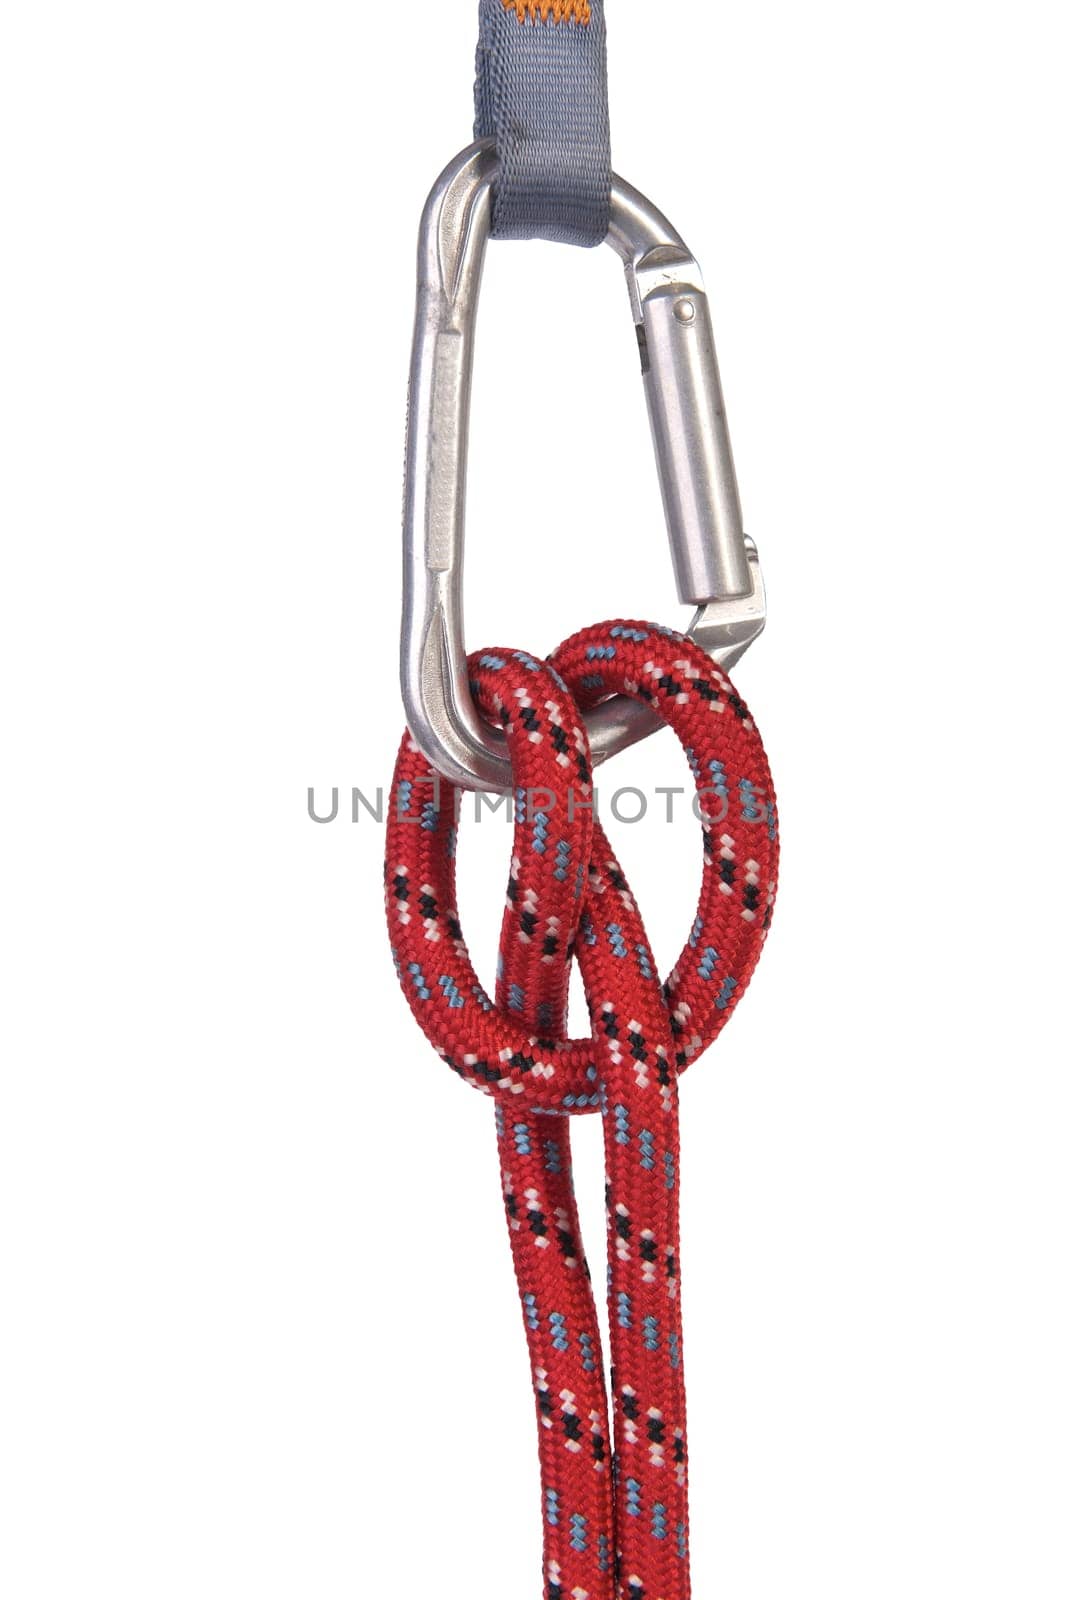 a red climbing rope knotted on a carabiner on a transparent background